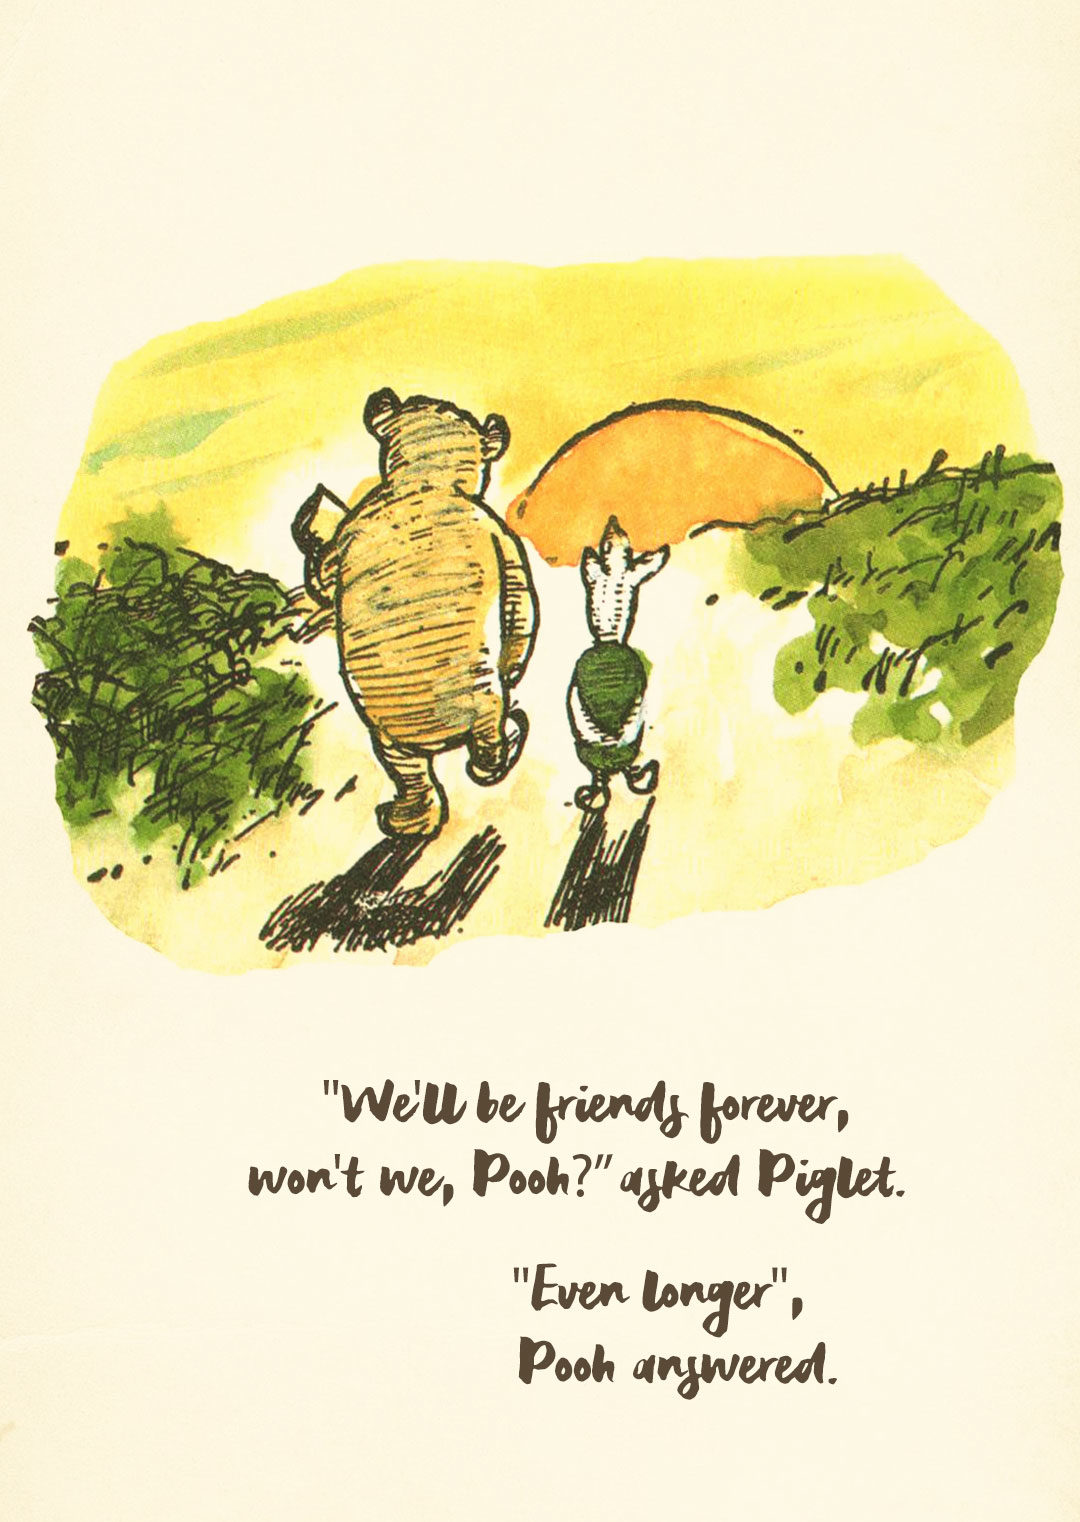 lesson-friends-forever-winnie-pooh-lessons-friendship-mindfulness-zesty-life